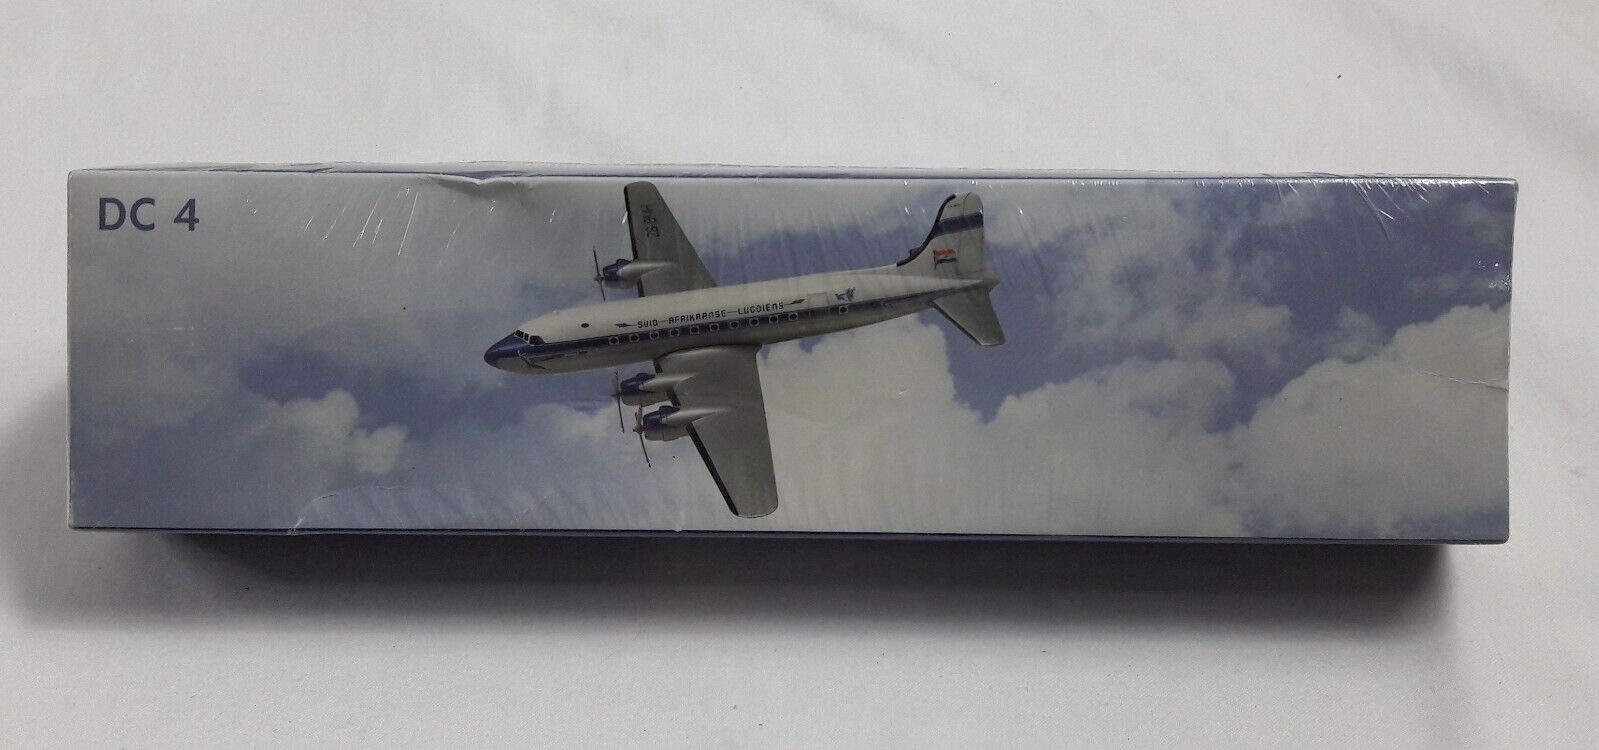 New, 1:400 Scale SOUTH AFRICAN AIRWAYS Douglas DC-4 Model Airplane Display